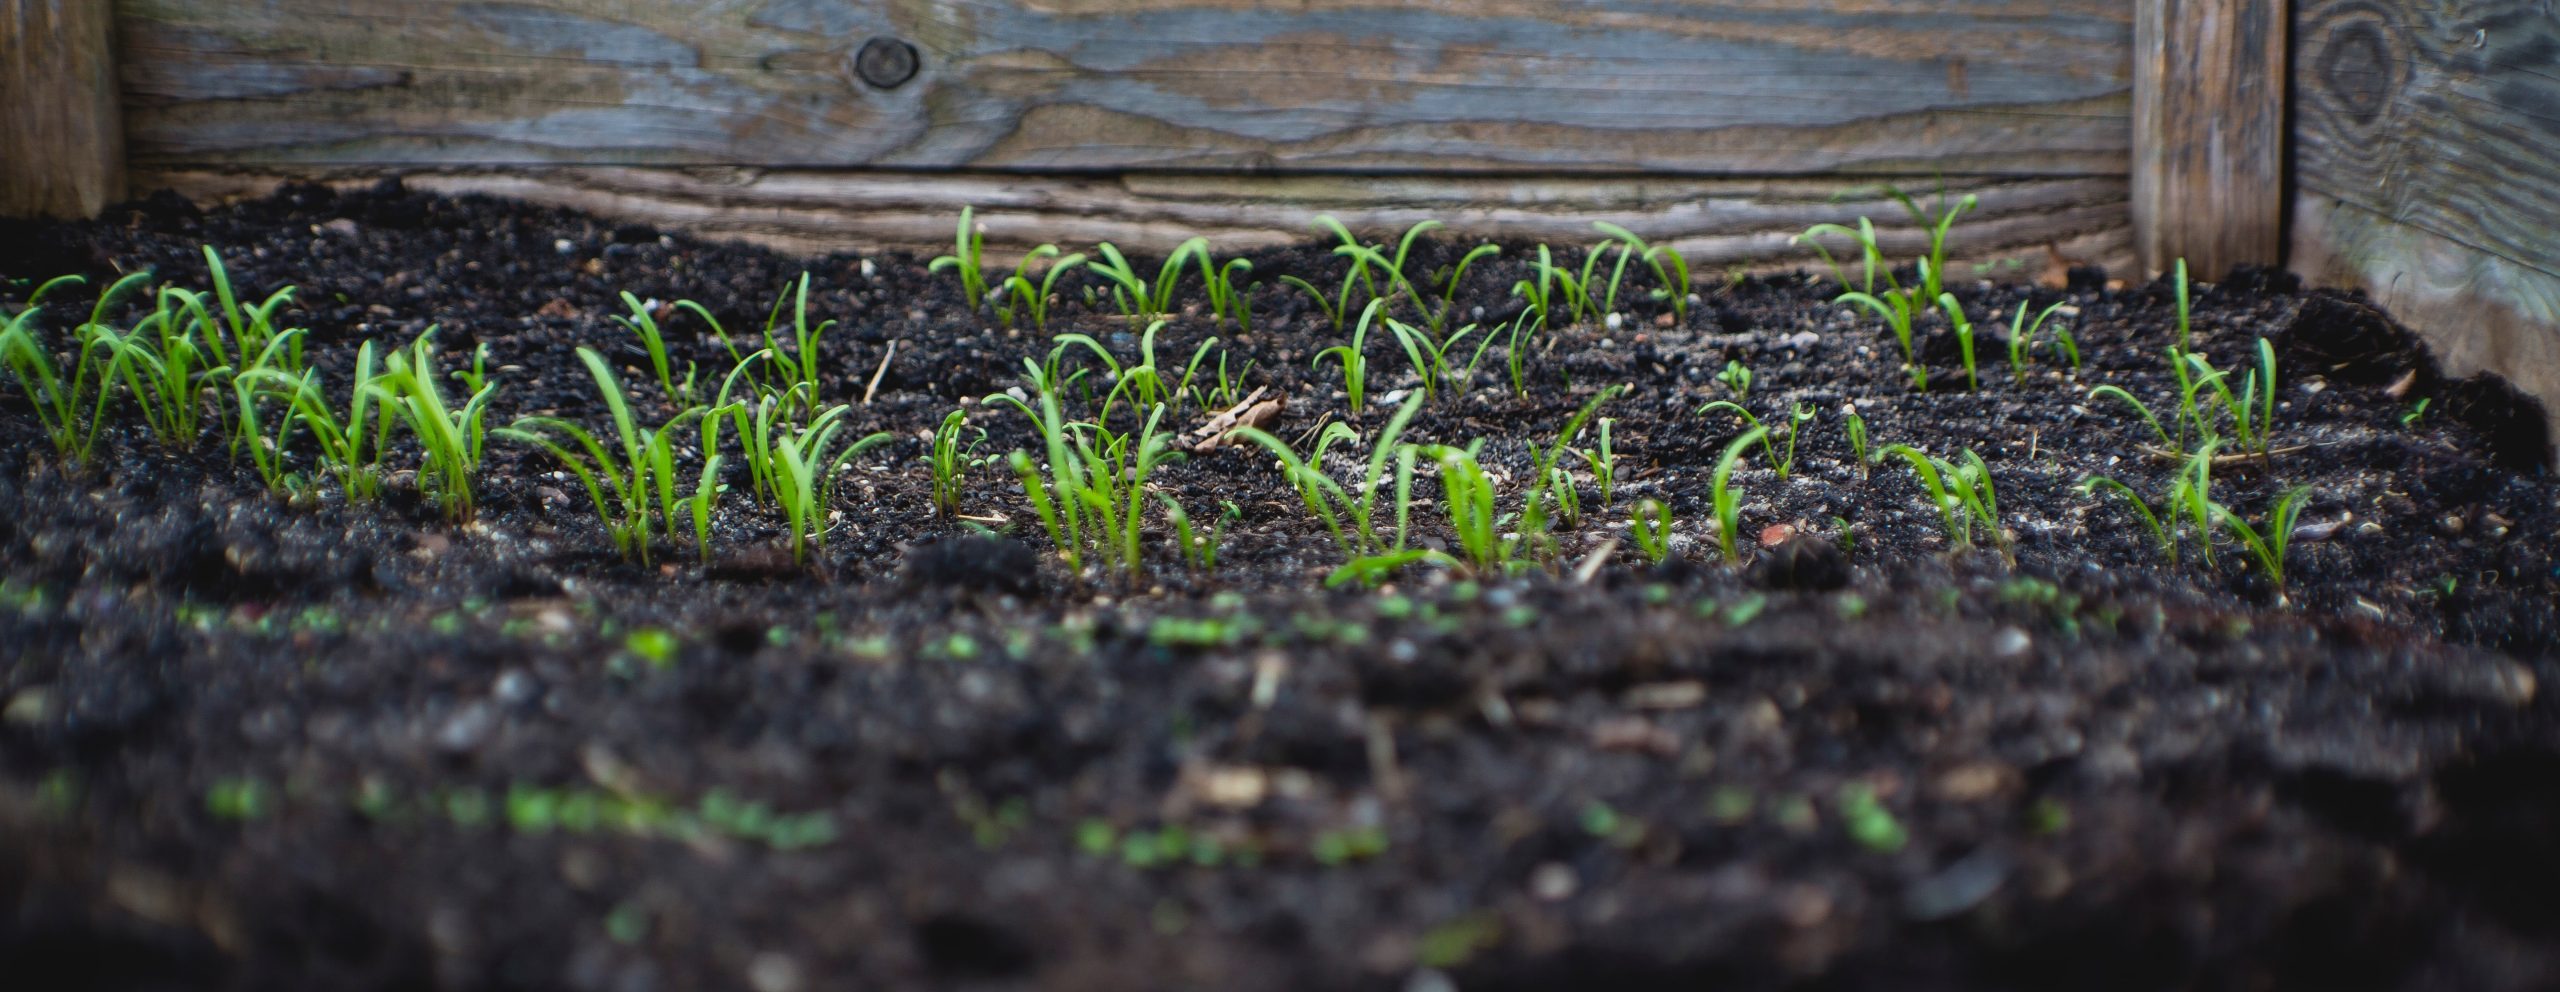 Dark brown soil with small green plants emerging.